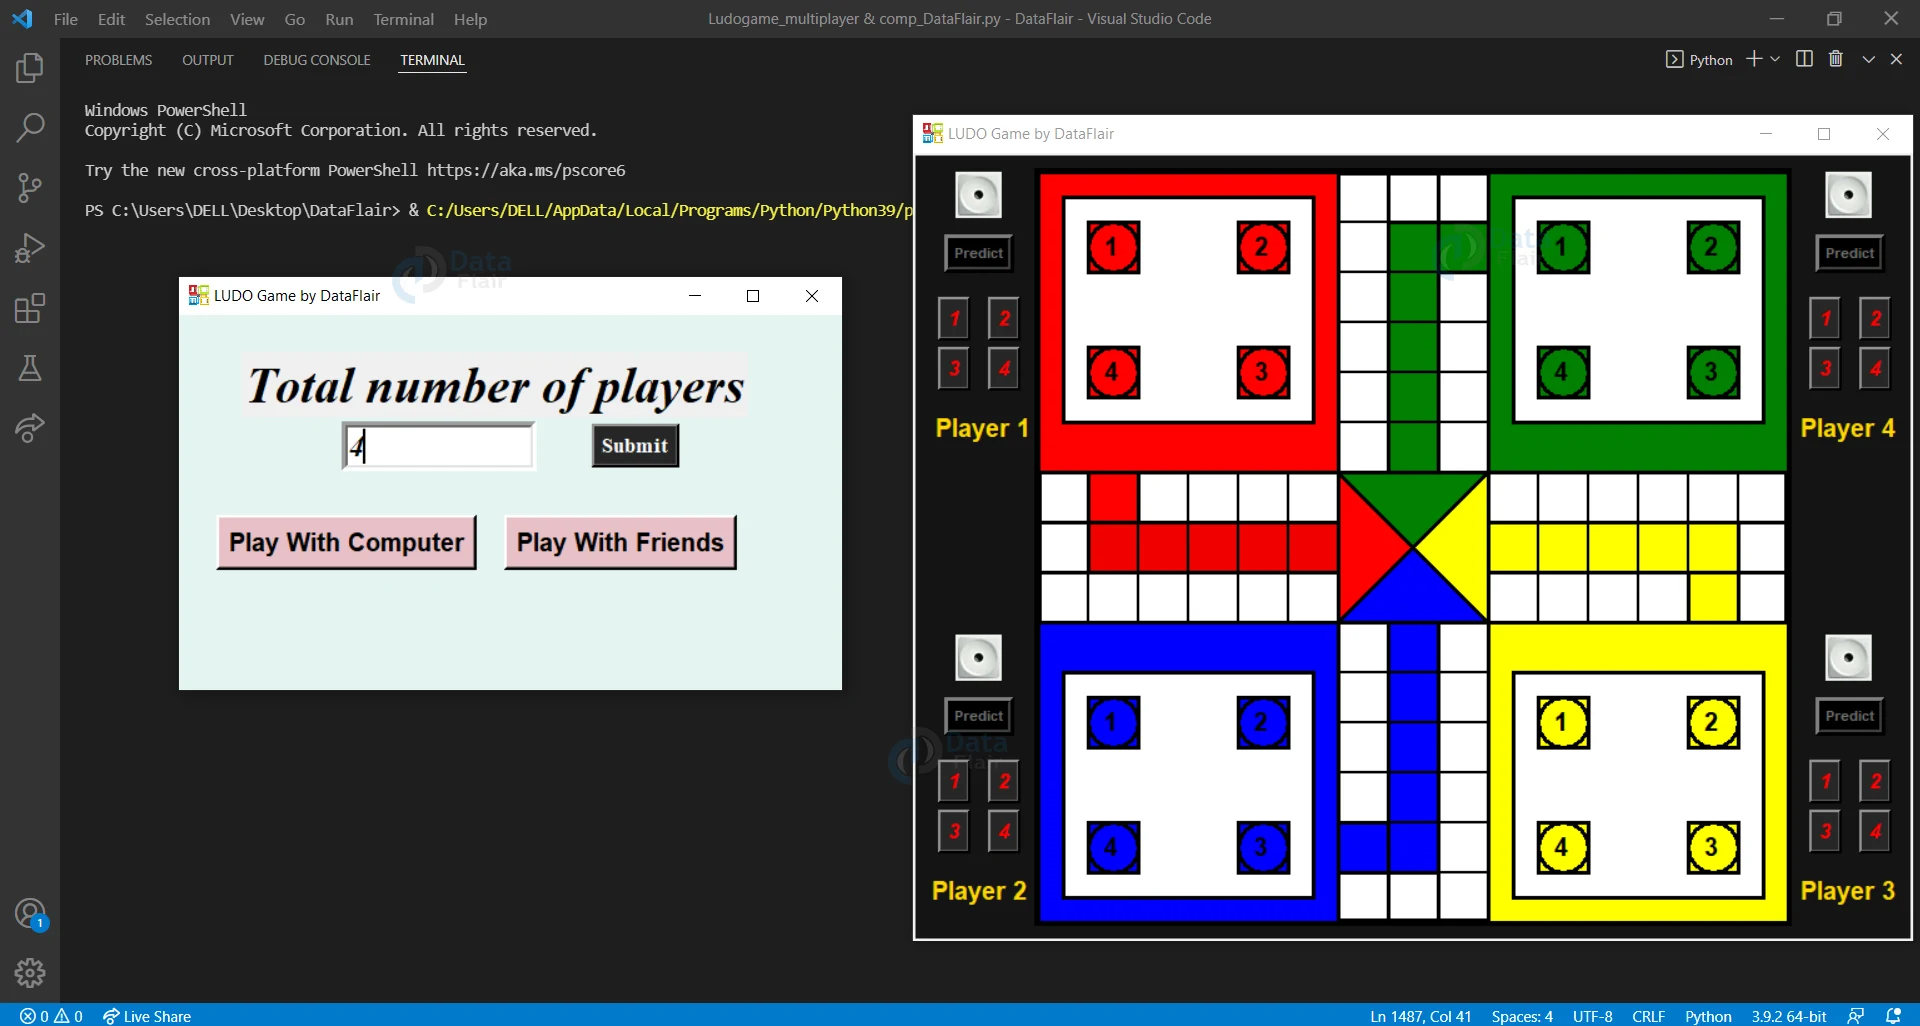 PPT - How to Play Ludo online? PowerPoint Presentation, free